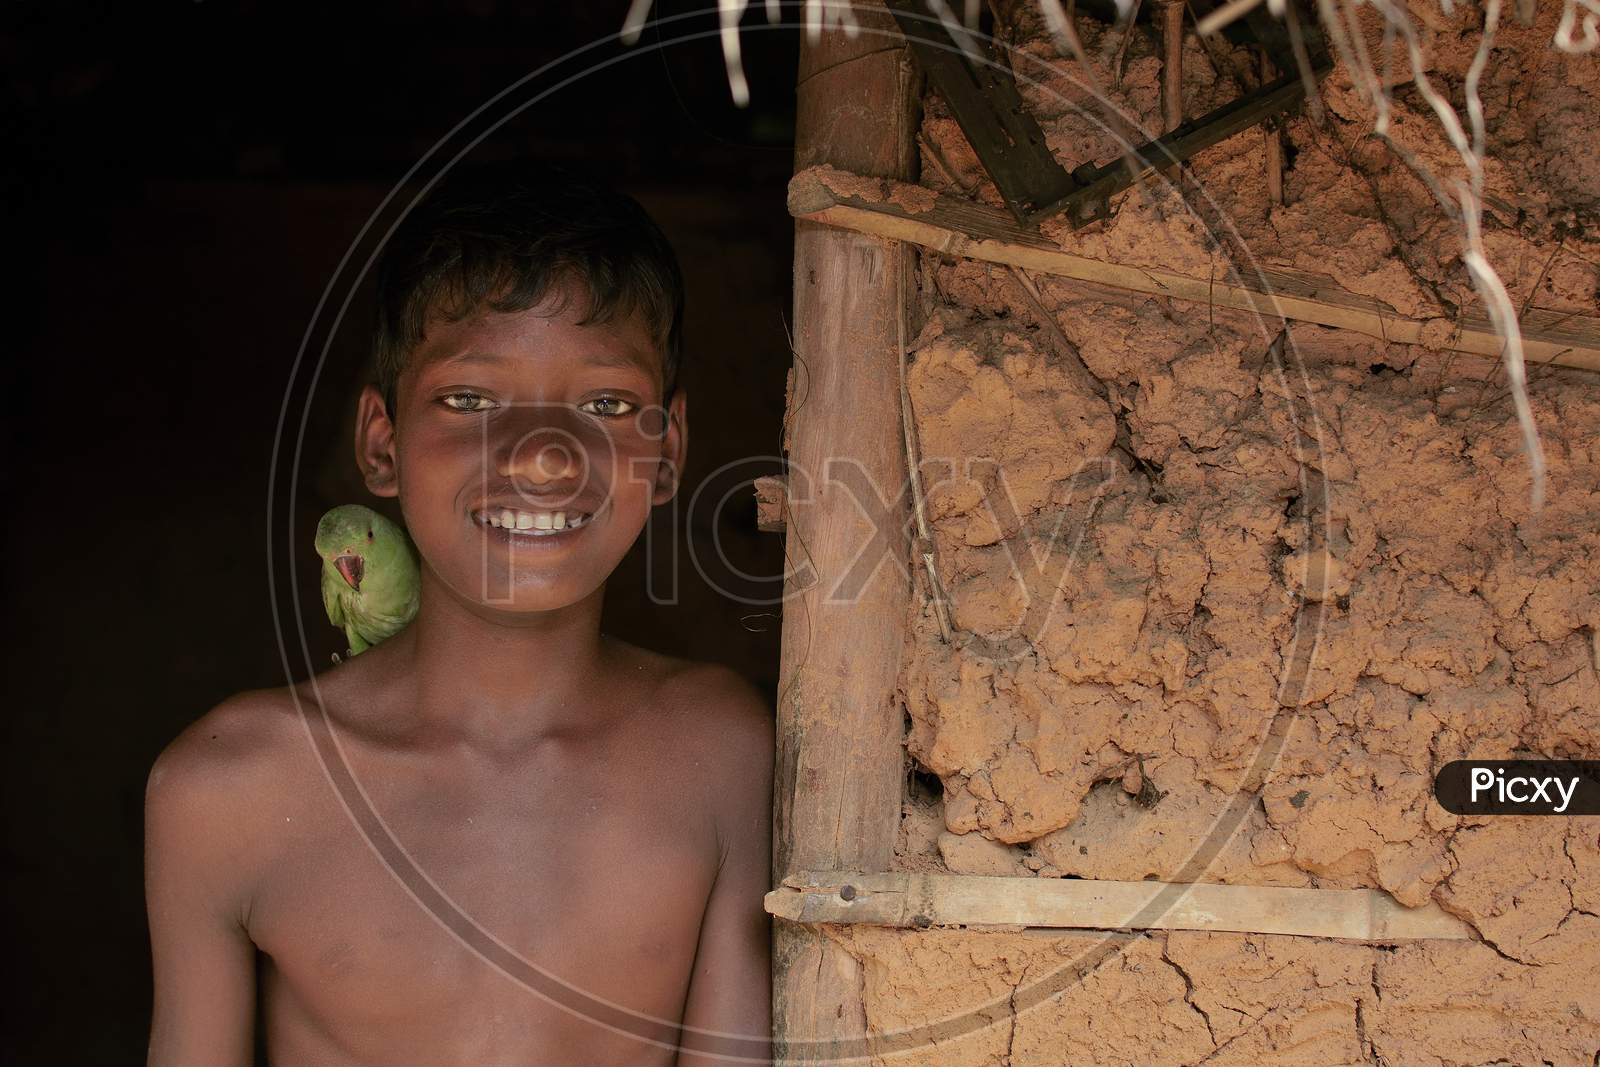 A Smiling Boy with a Green Parrot on His Right Shoulder